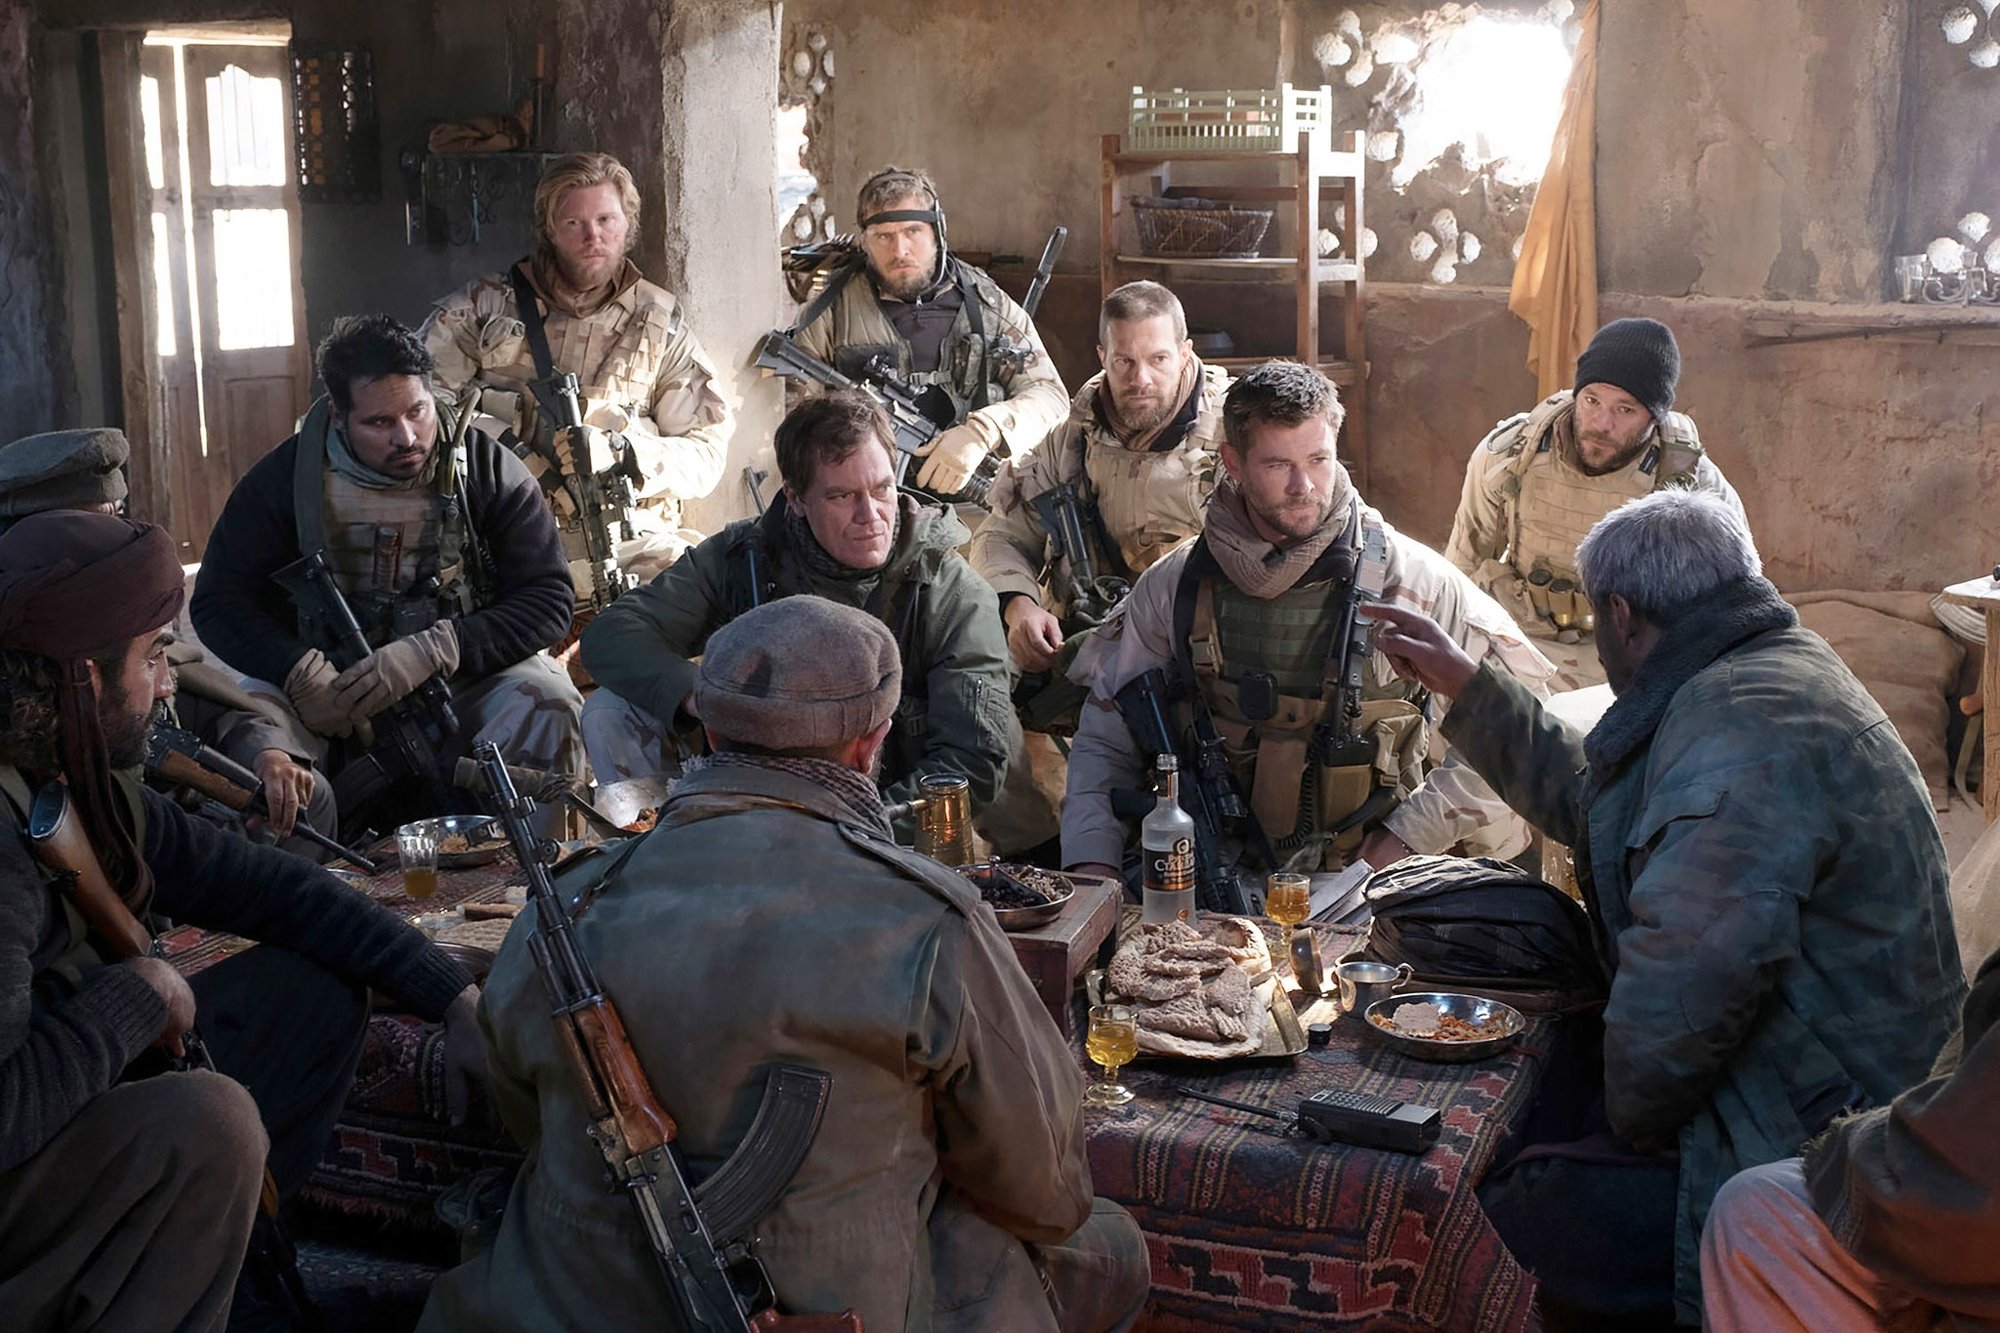 Michael Pena, Thad Luckinbill, Michael Shannon, Jack Kesy, Geoff Stults, Chris Hemsworth and Austin Hebert in Warner Bros. Pictures' 12 Strong (2018)